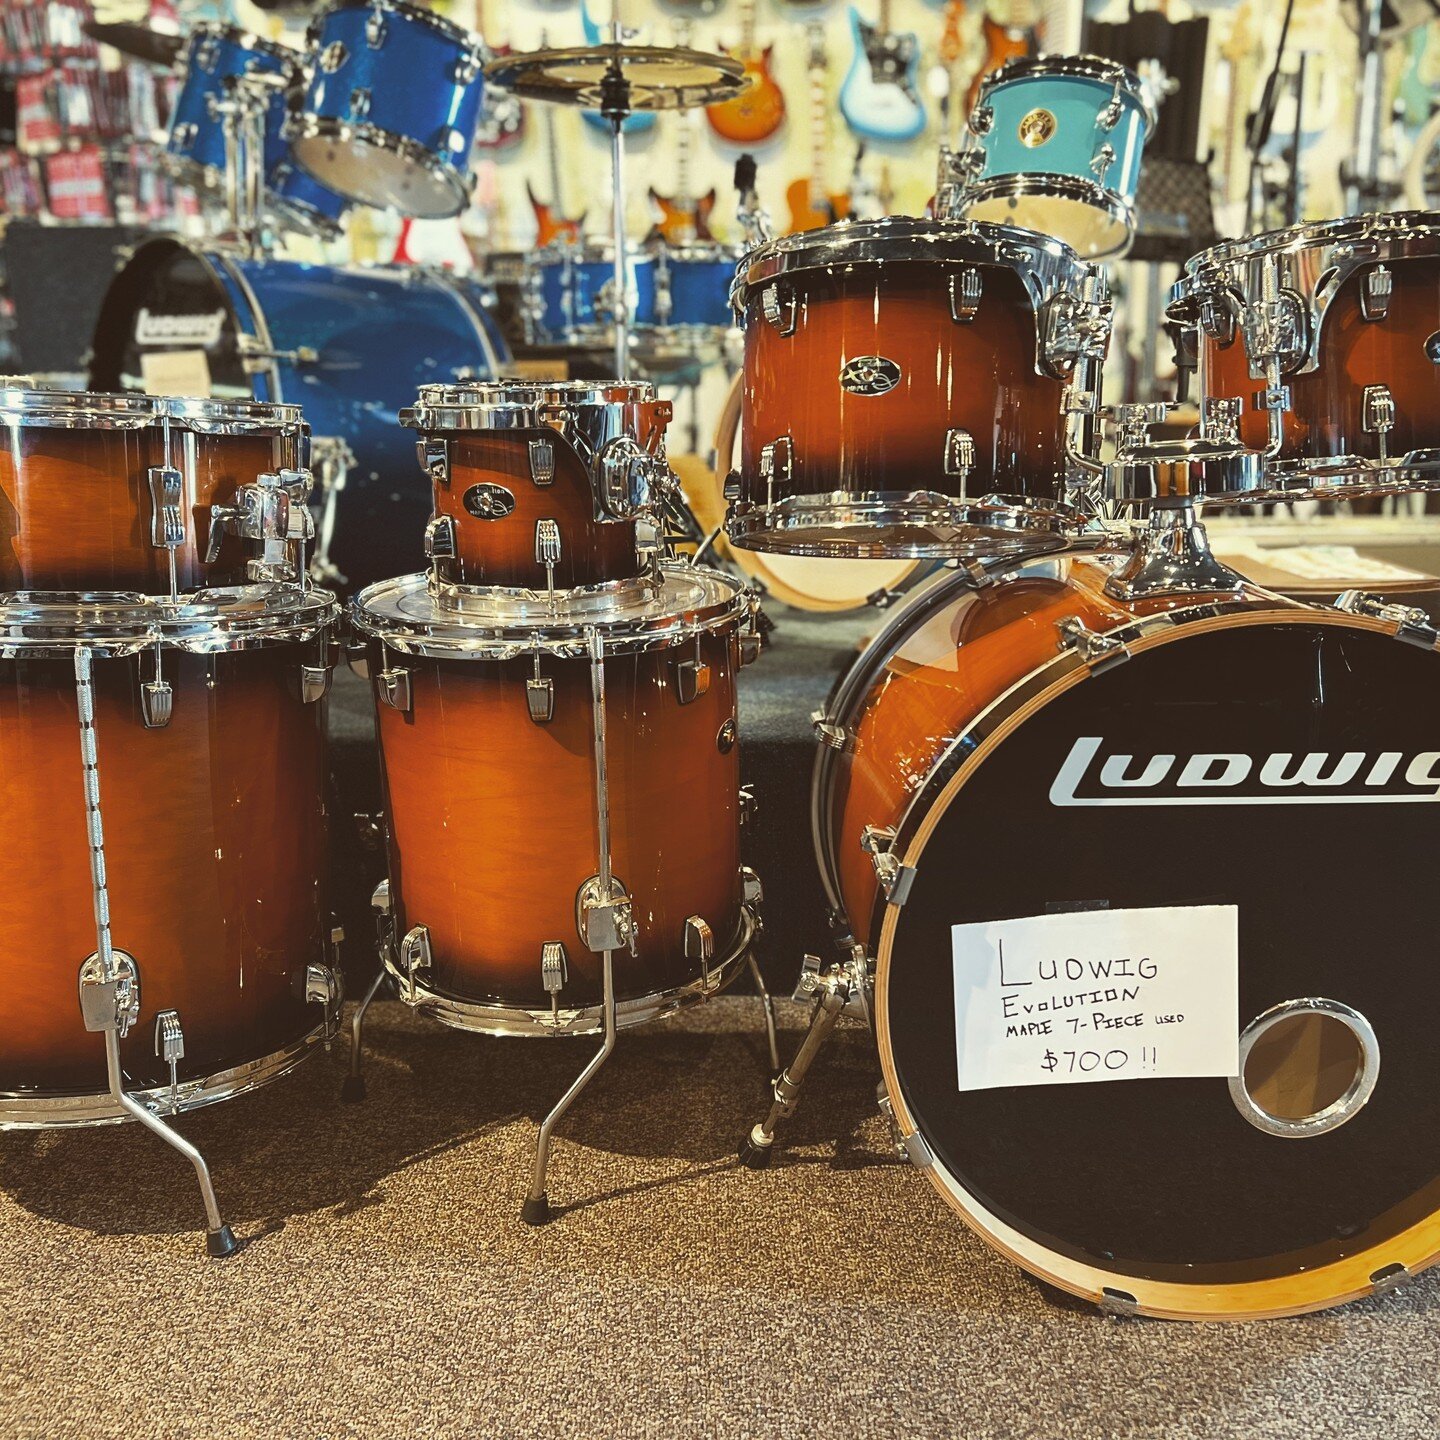 Ludwig Evolution Maple! 7 pieces, no hardware. Great drums, and a bunch of them for $600! C'mon down. 
Beautiful.